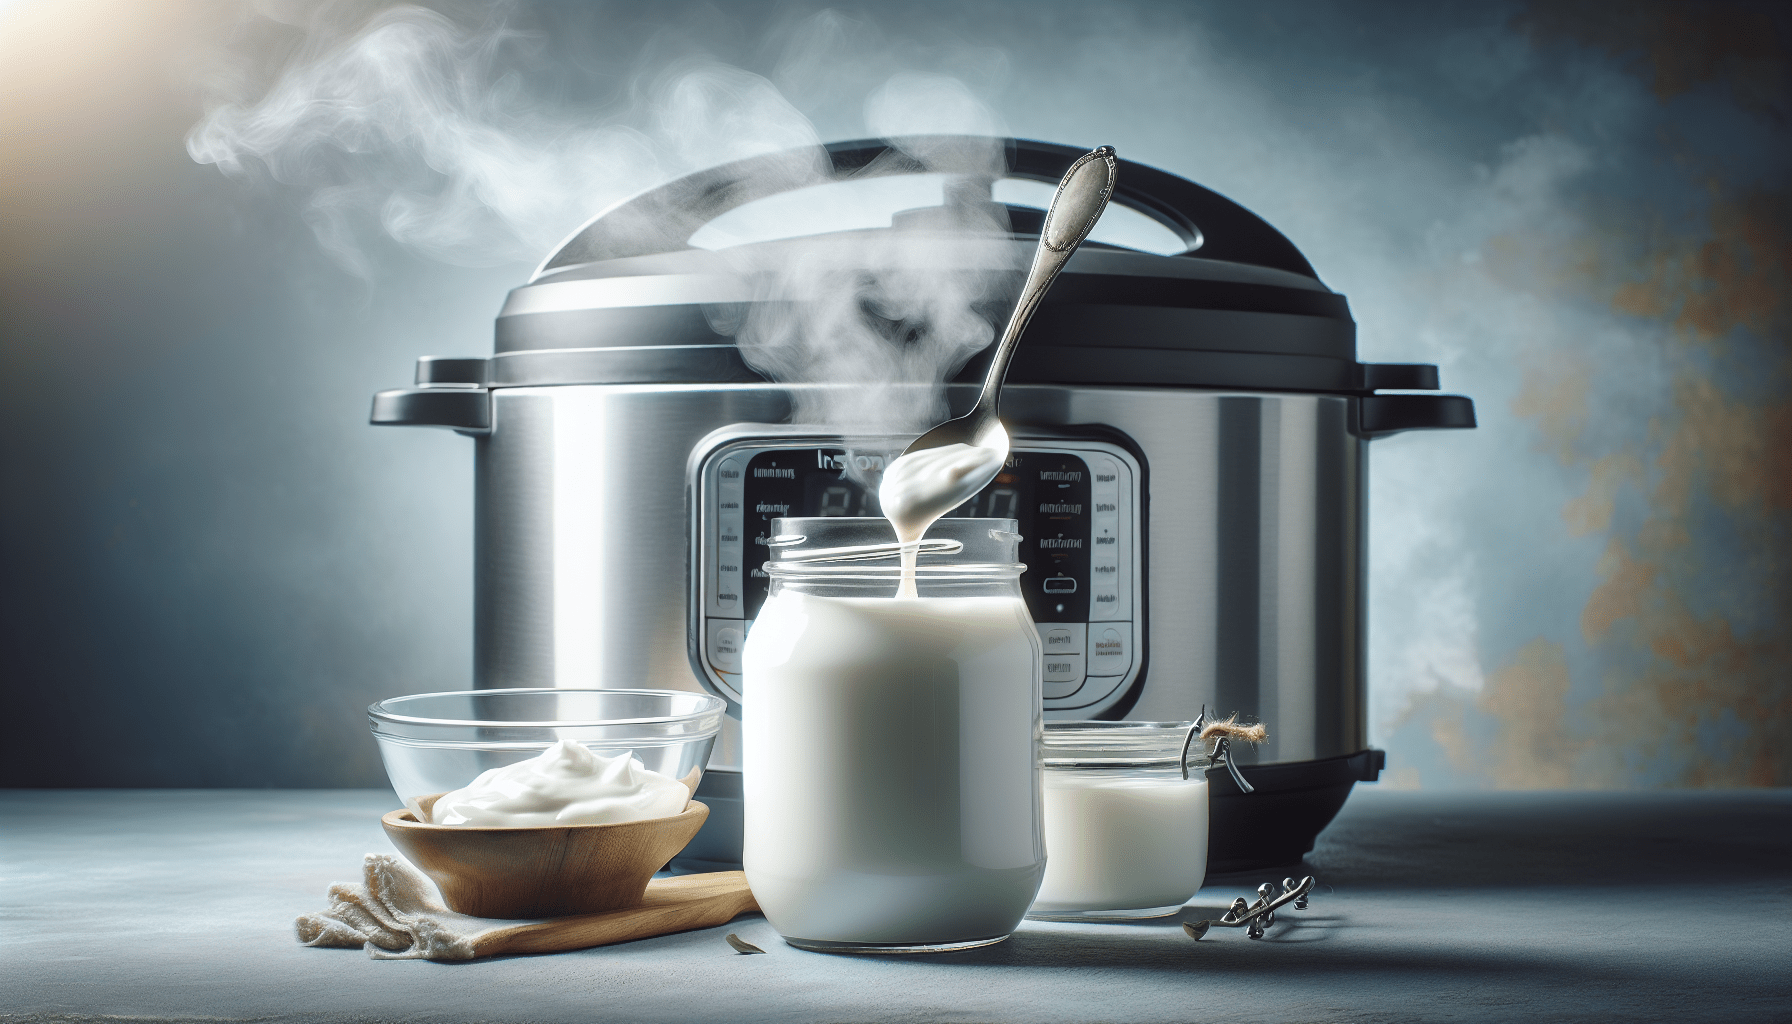 How to Make Homemade Yogurt in an Instant Pot